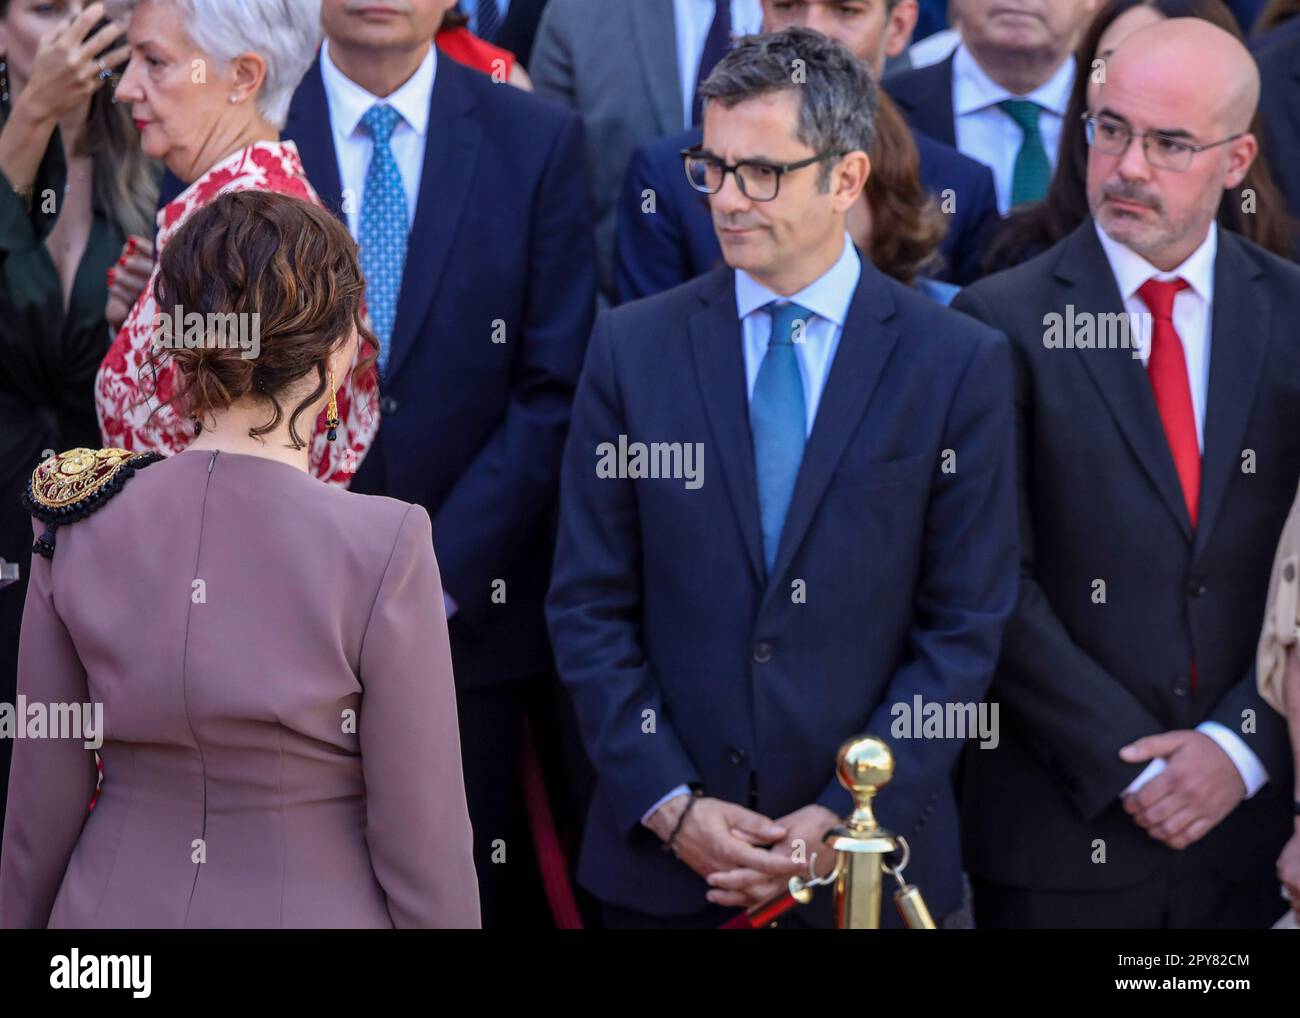 Felix Bolaños (C), Minister of the Presidency of Spain, watches Isabel Diaz Ayuso, President of the Community of Madrid during the ceremony for the 2 May festivities in Madrid. One more year Madrid has celebrated the festivities of May 2. At the reception and official acts organized by the Presidency of the Community of Madrid at the Royal Post Office in Puerta del Sol, one of the protagonists were Felix Bolaños, Minister of the Presidency, Relations with the Courts and Democratic Memory of the Government of Spain to whom the head of protocol of the Community of Madrid prevented him from acce Stock Photo